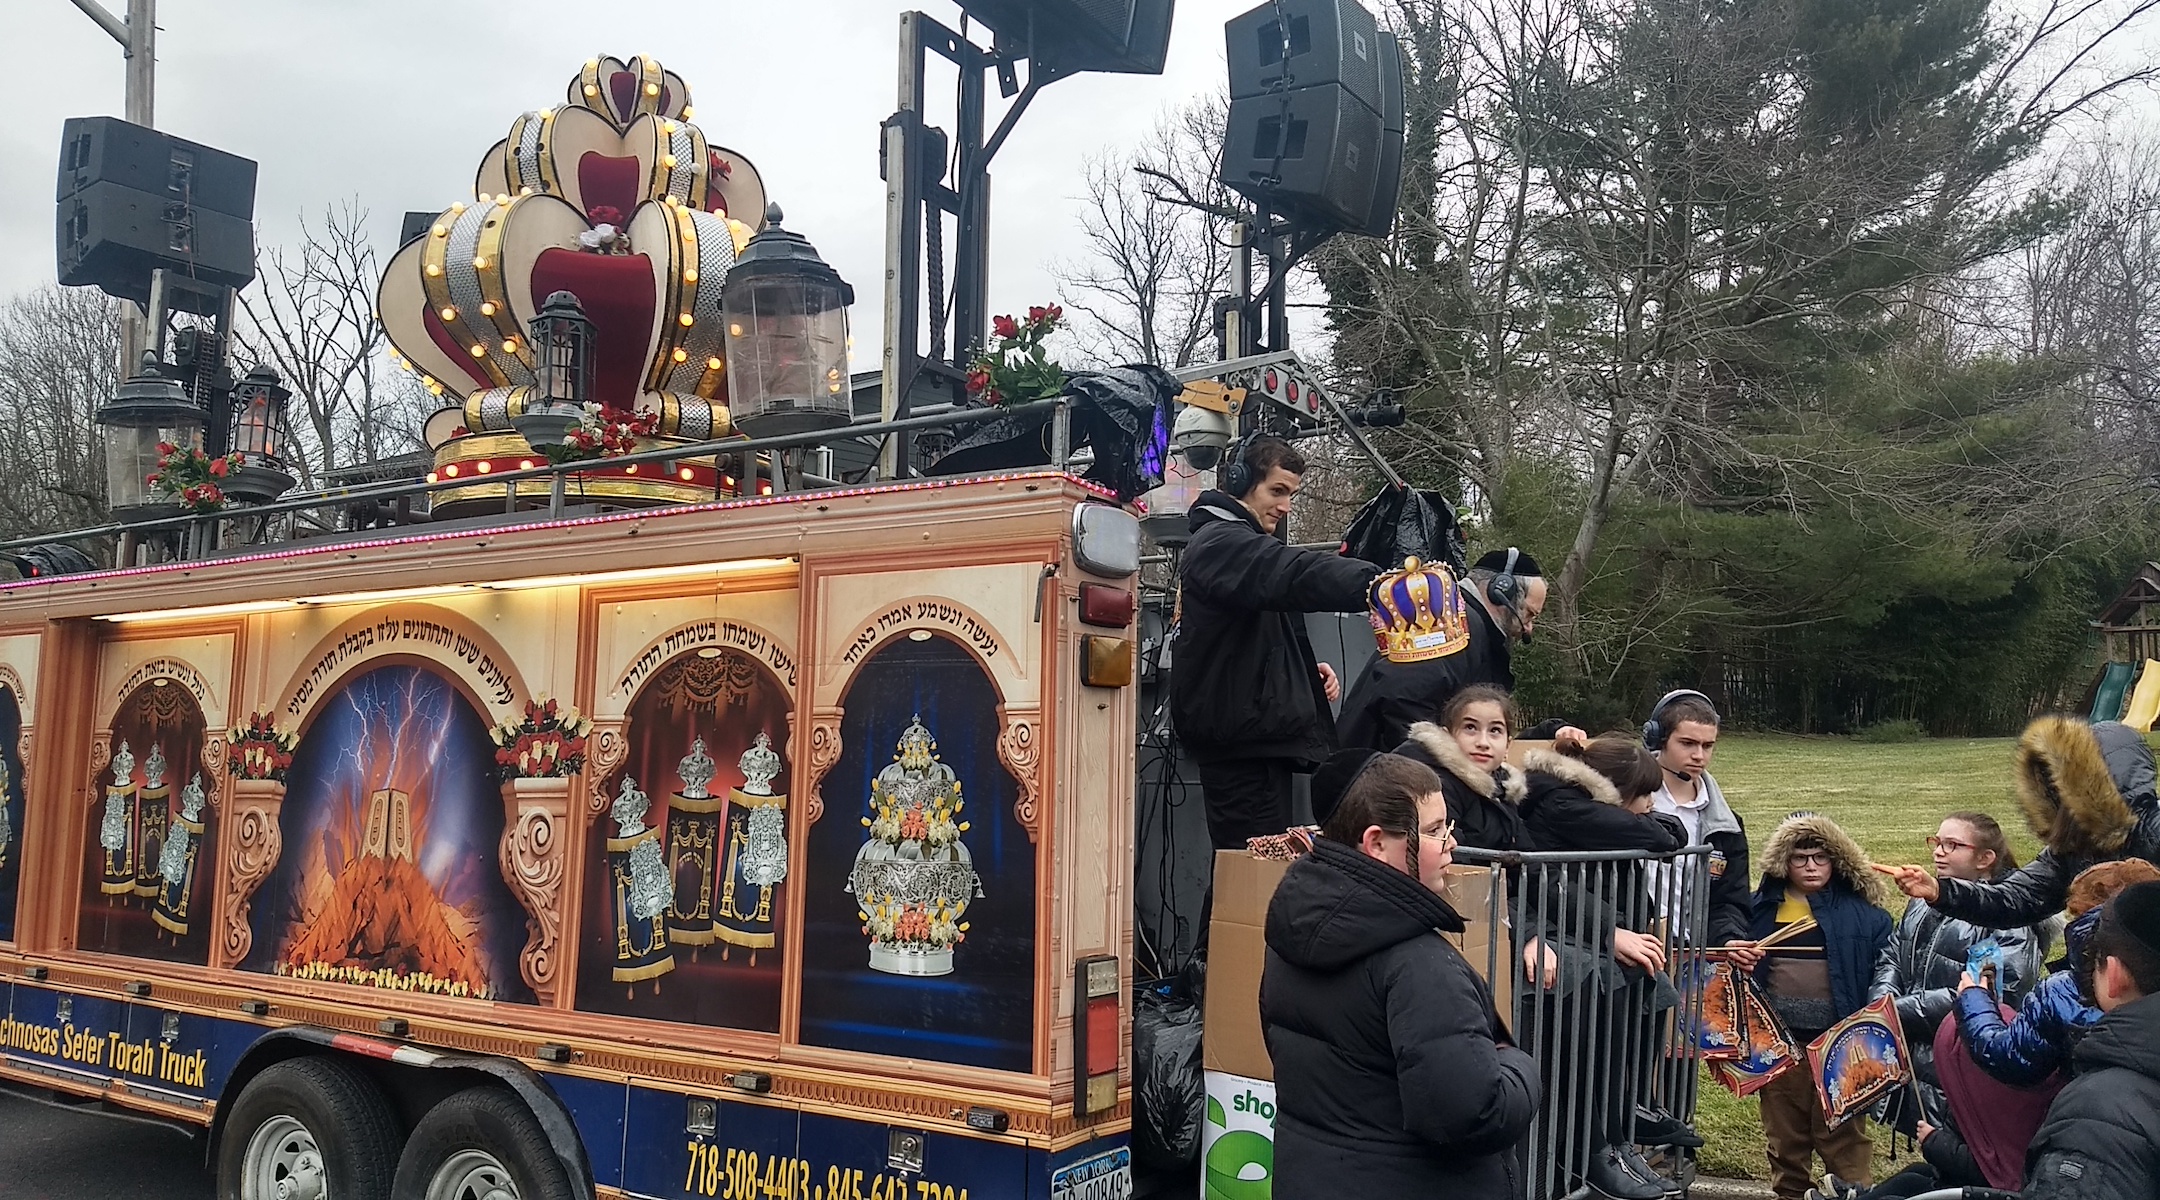 On Sunday afternoon, blocks away from the site of the previous night's stabbing, Jewish children gathered near a parade float to celebrate the dedication of a new Torah scroll. (Ben Sales)